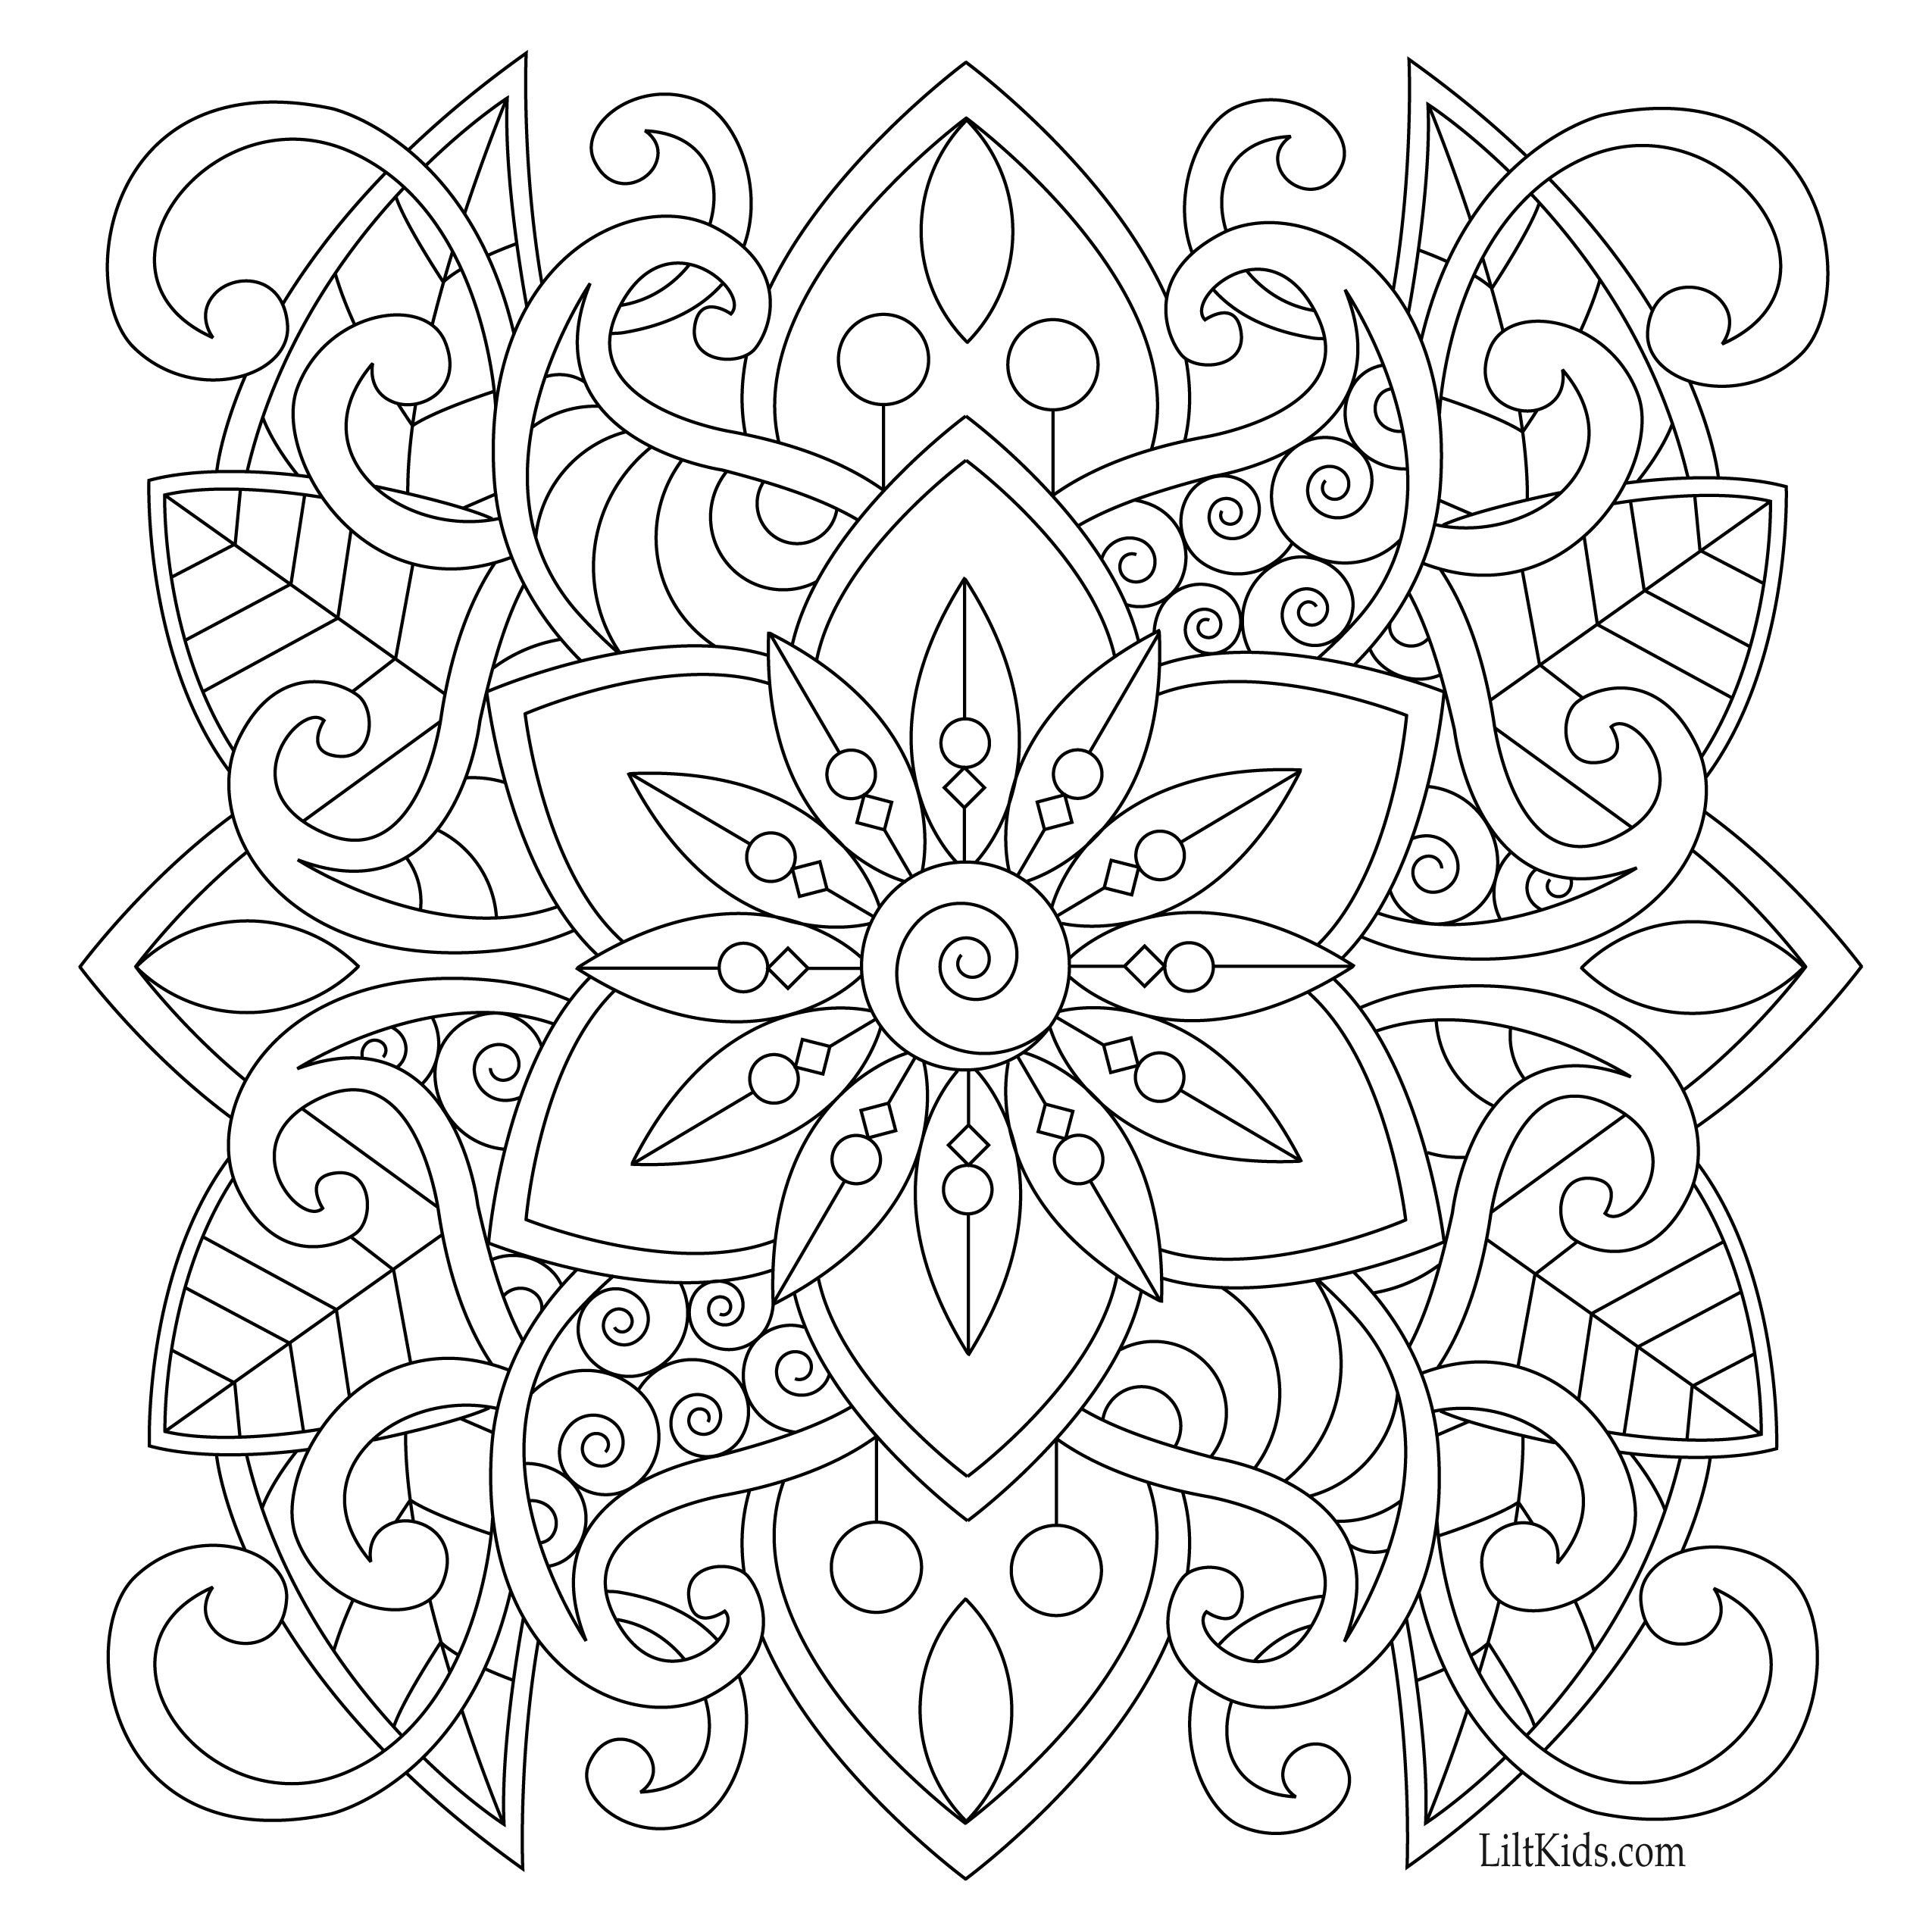 Easy Coloring Pages For Adults
 Free easy mandala for beginners adult coloring book image